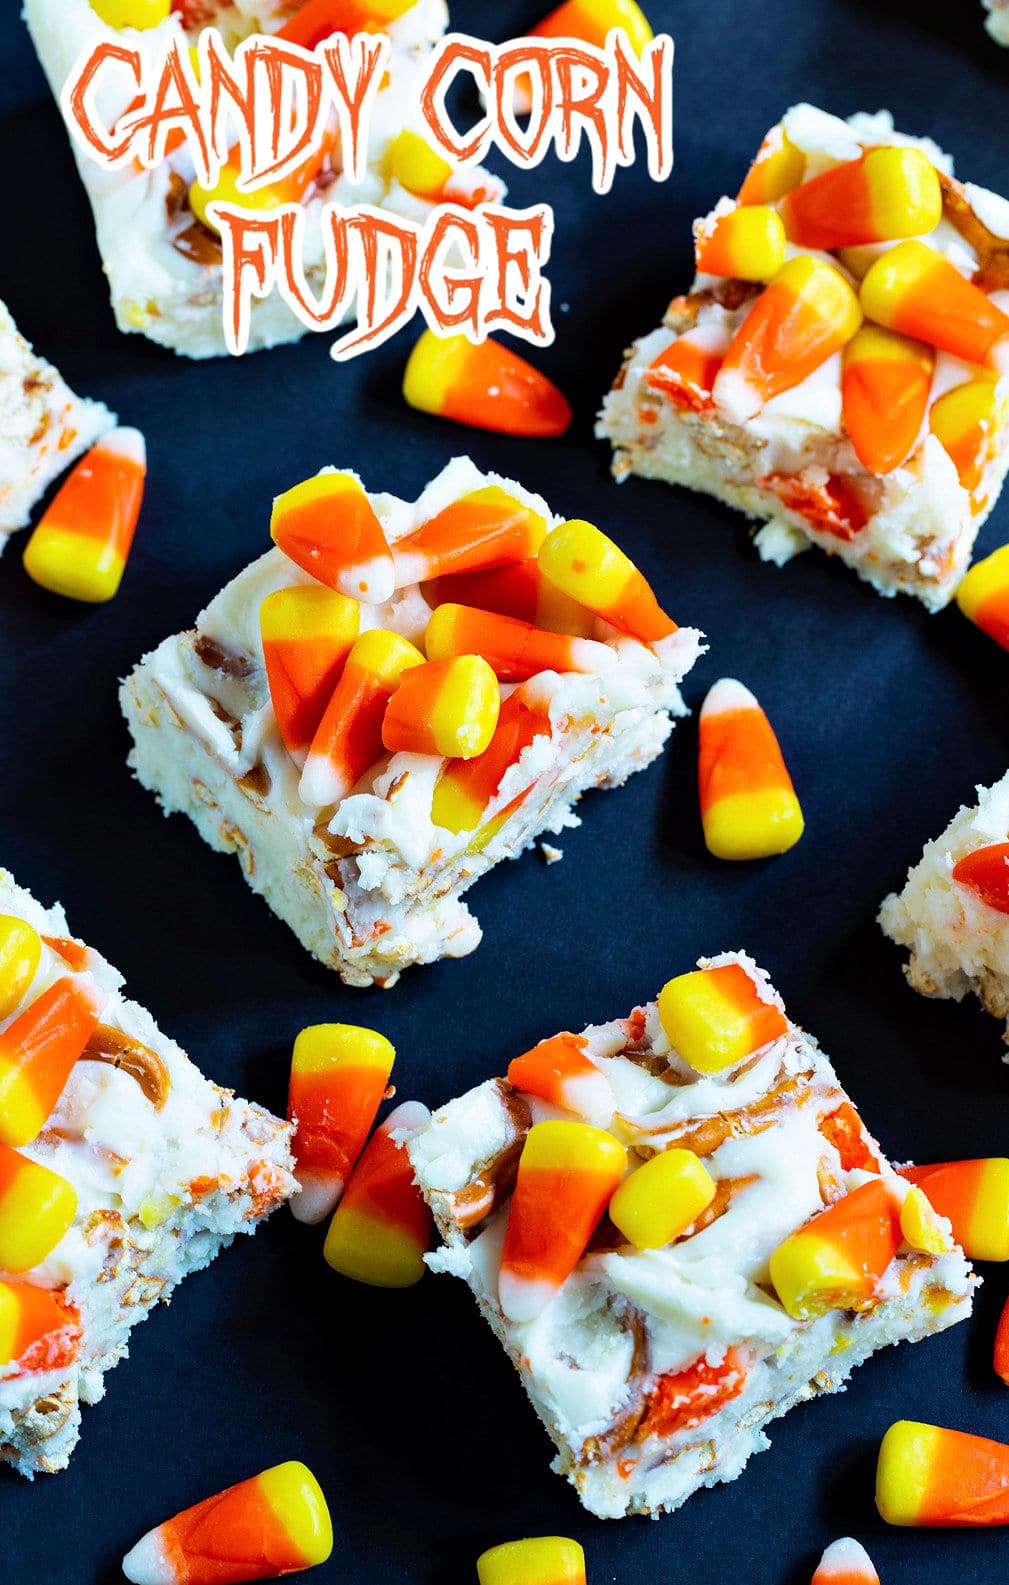 Squares of Candy Corn Fudge with pieces of candy corn scattered around them.